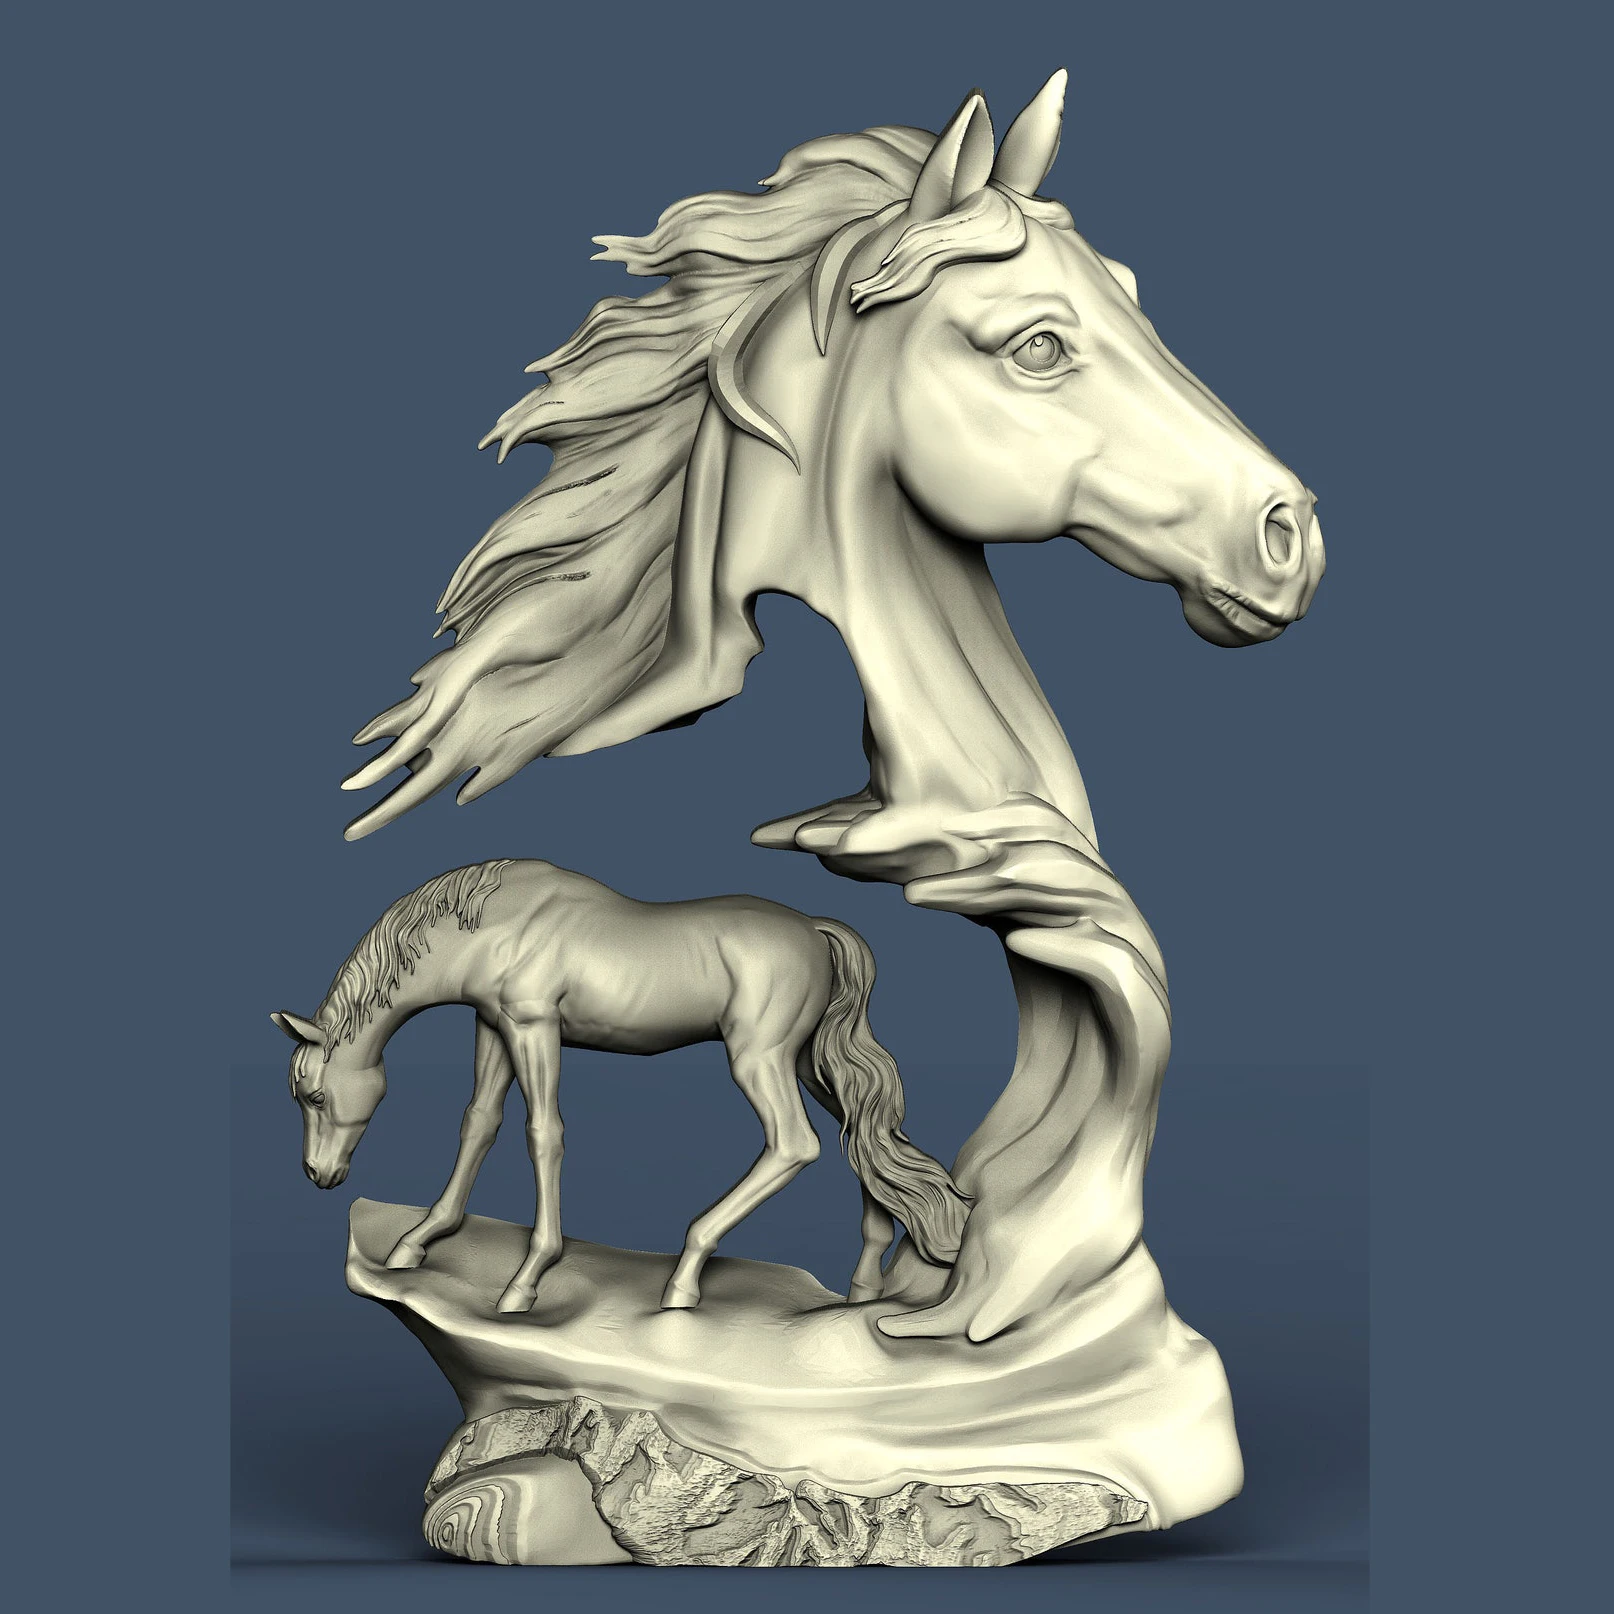 Two Horses Animal 3D STL Model for CNC Router Engraving & 3D Printing Relief Support ZBrush Artcam Aspire Cut3D wood drill bit